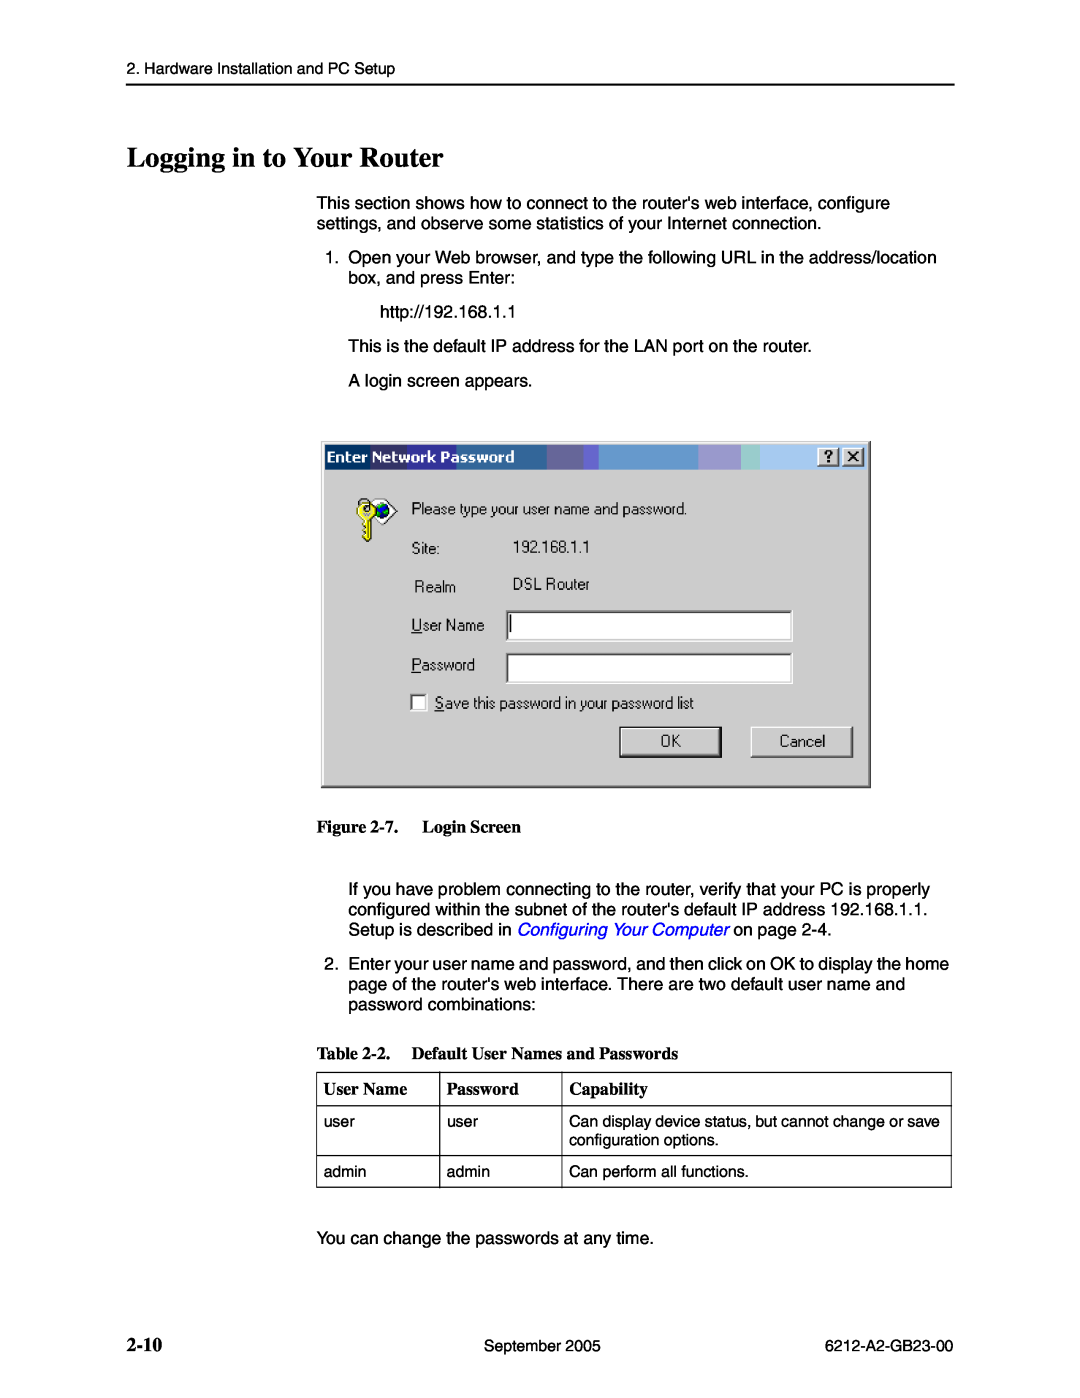 Paradyne 6212-I1 manual Logging in to Your Router, 2-10, 7. Login Screen, Default User Names and Passwords, Capability 